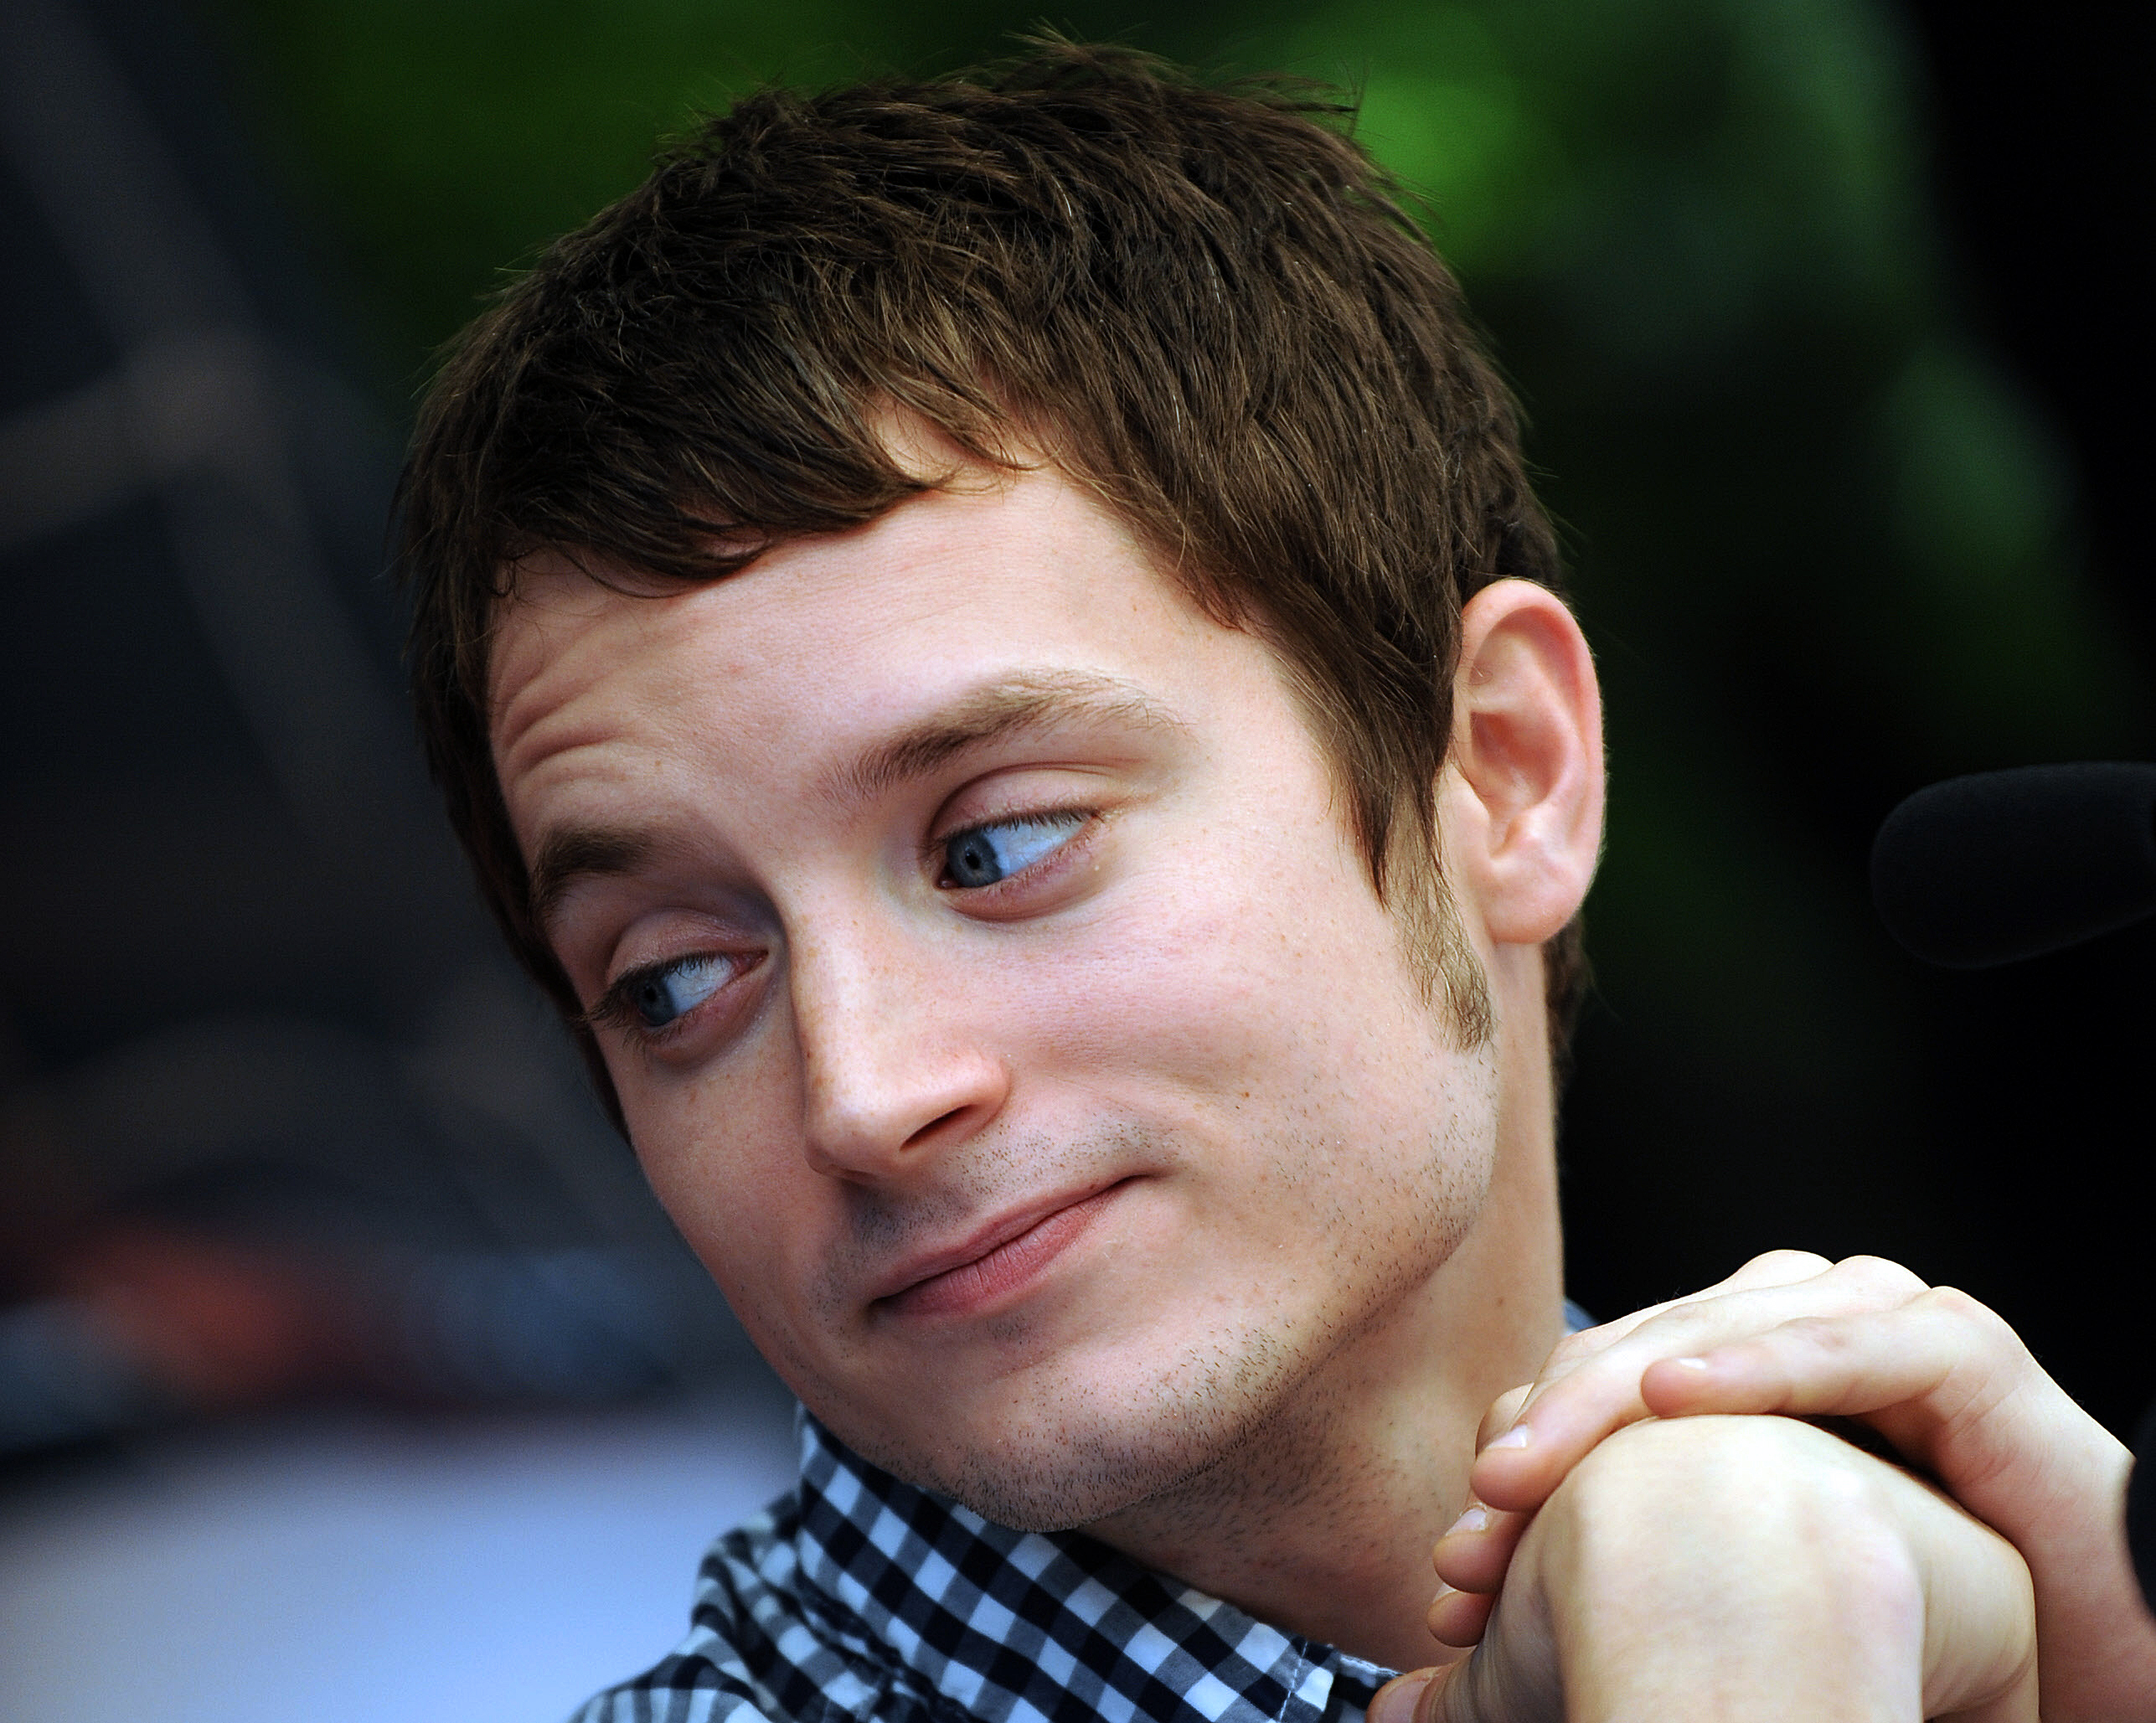 Elijah Wood, who played Frodo in the 'The Lord of the Rings,' gestures during a press conference in Santiago, Chile.